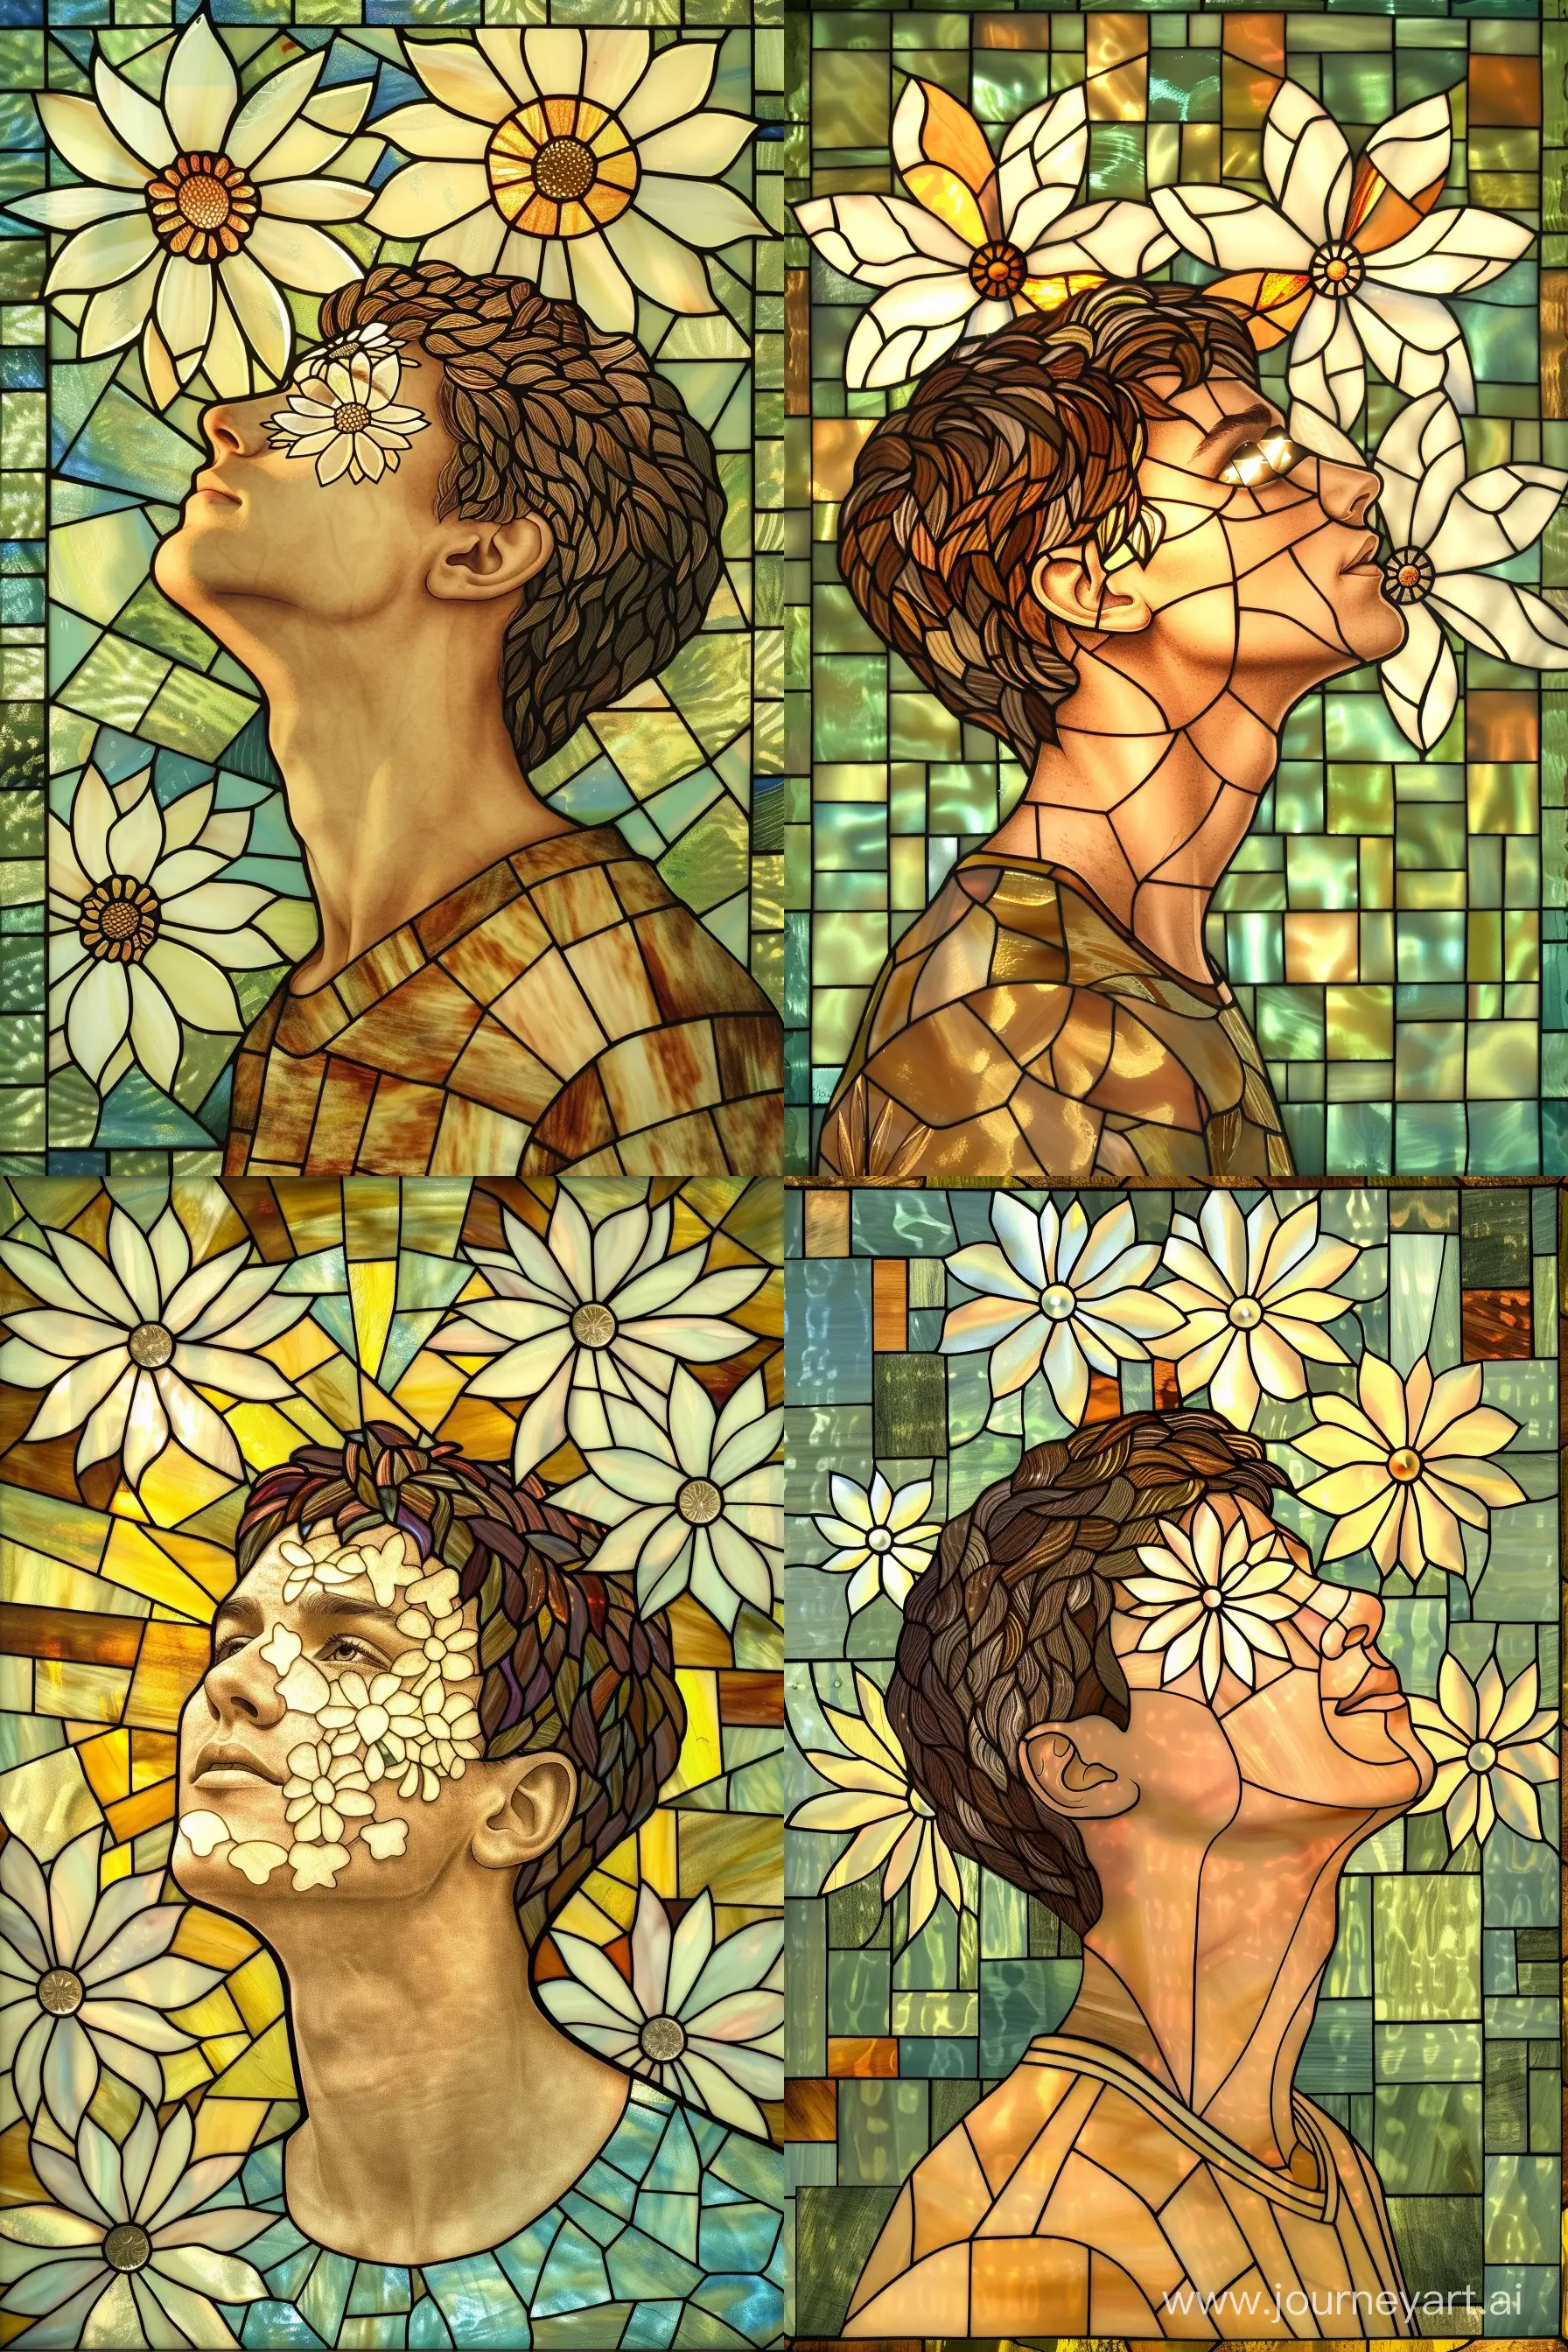 Man-with-Dark-Wavy-Hair-and-White-Flower-Eyes-in-Stained-Glass-Art